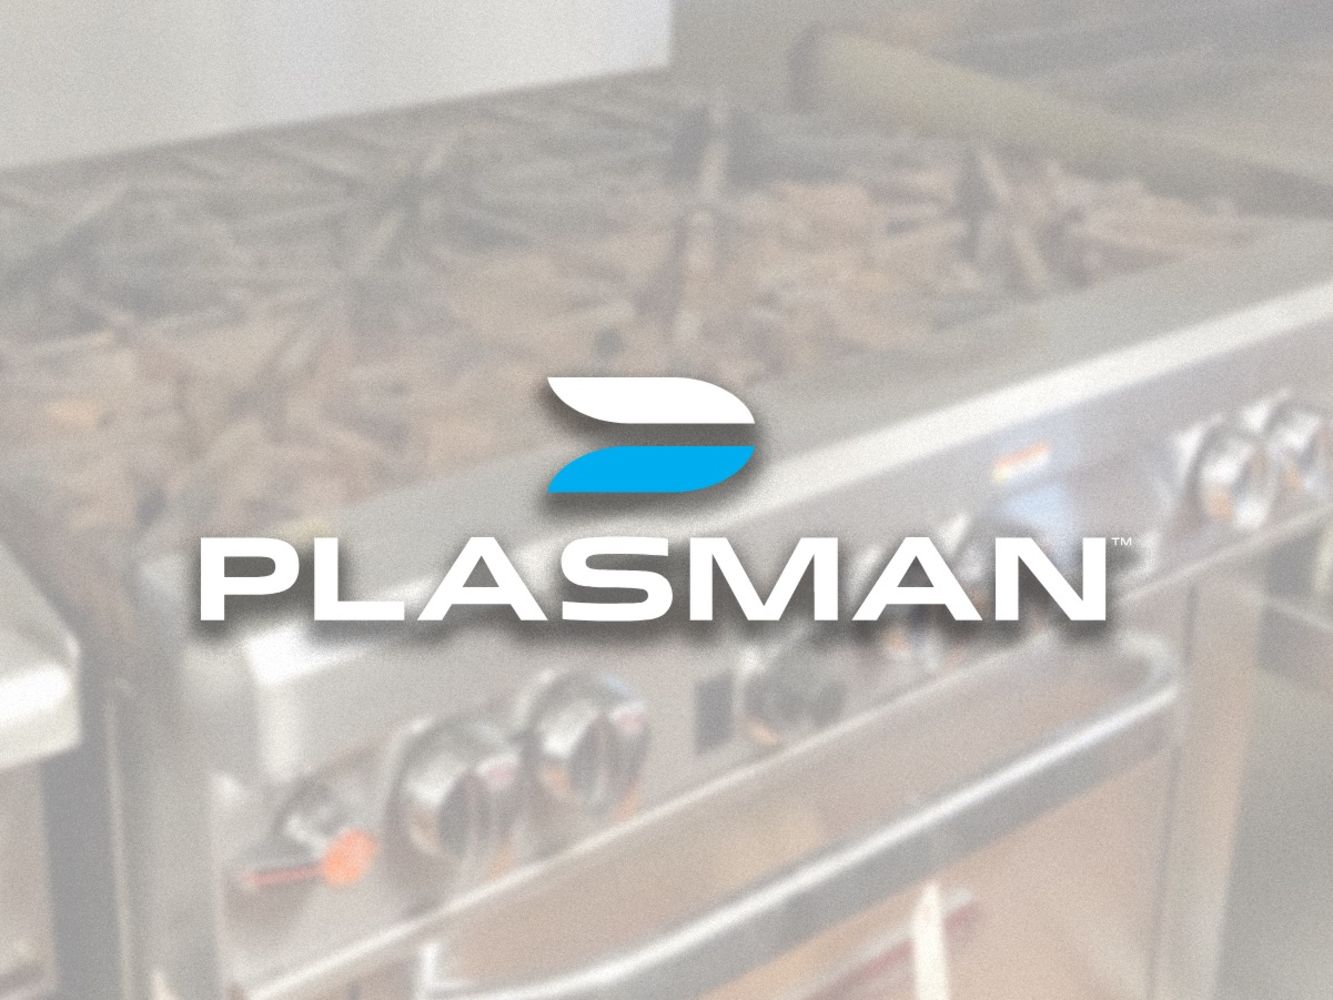 Commercial Kitchen and Cafeteria Equipment - surplus to Plasman Manufacturing - Greer, SC